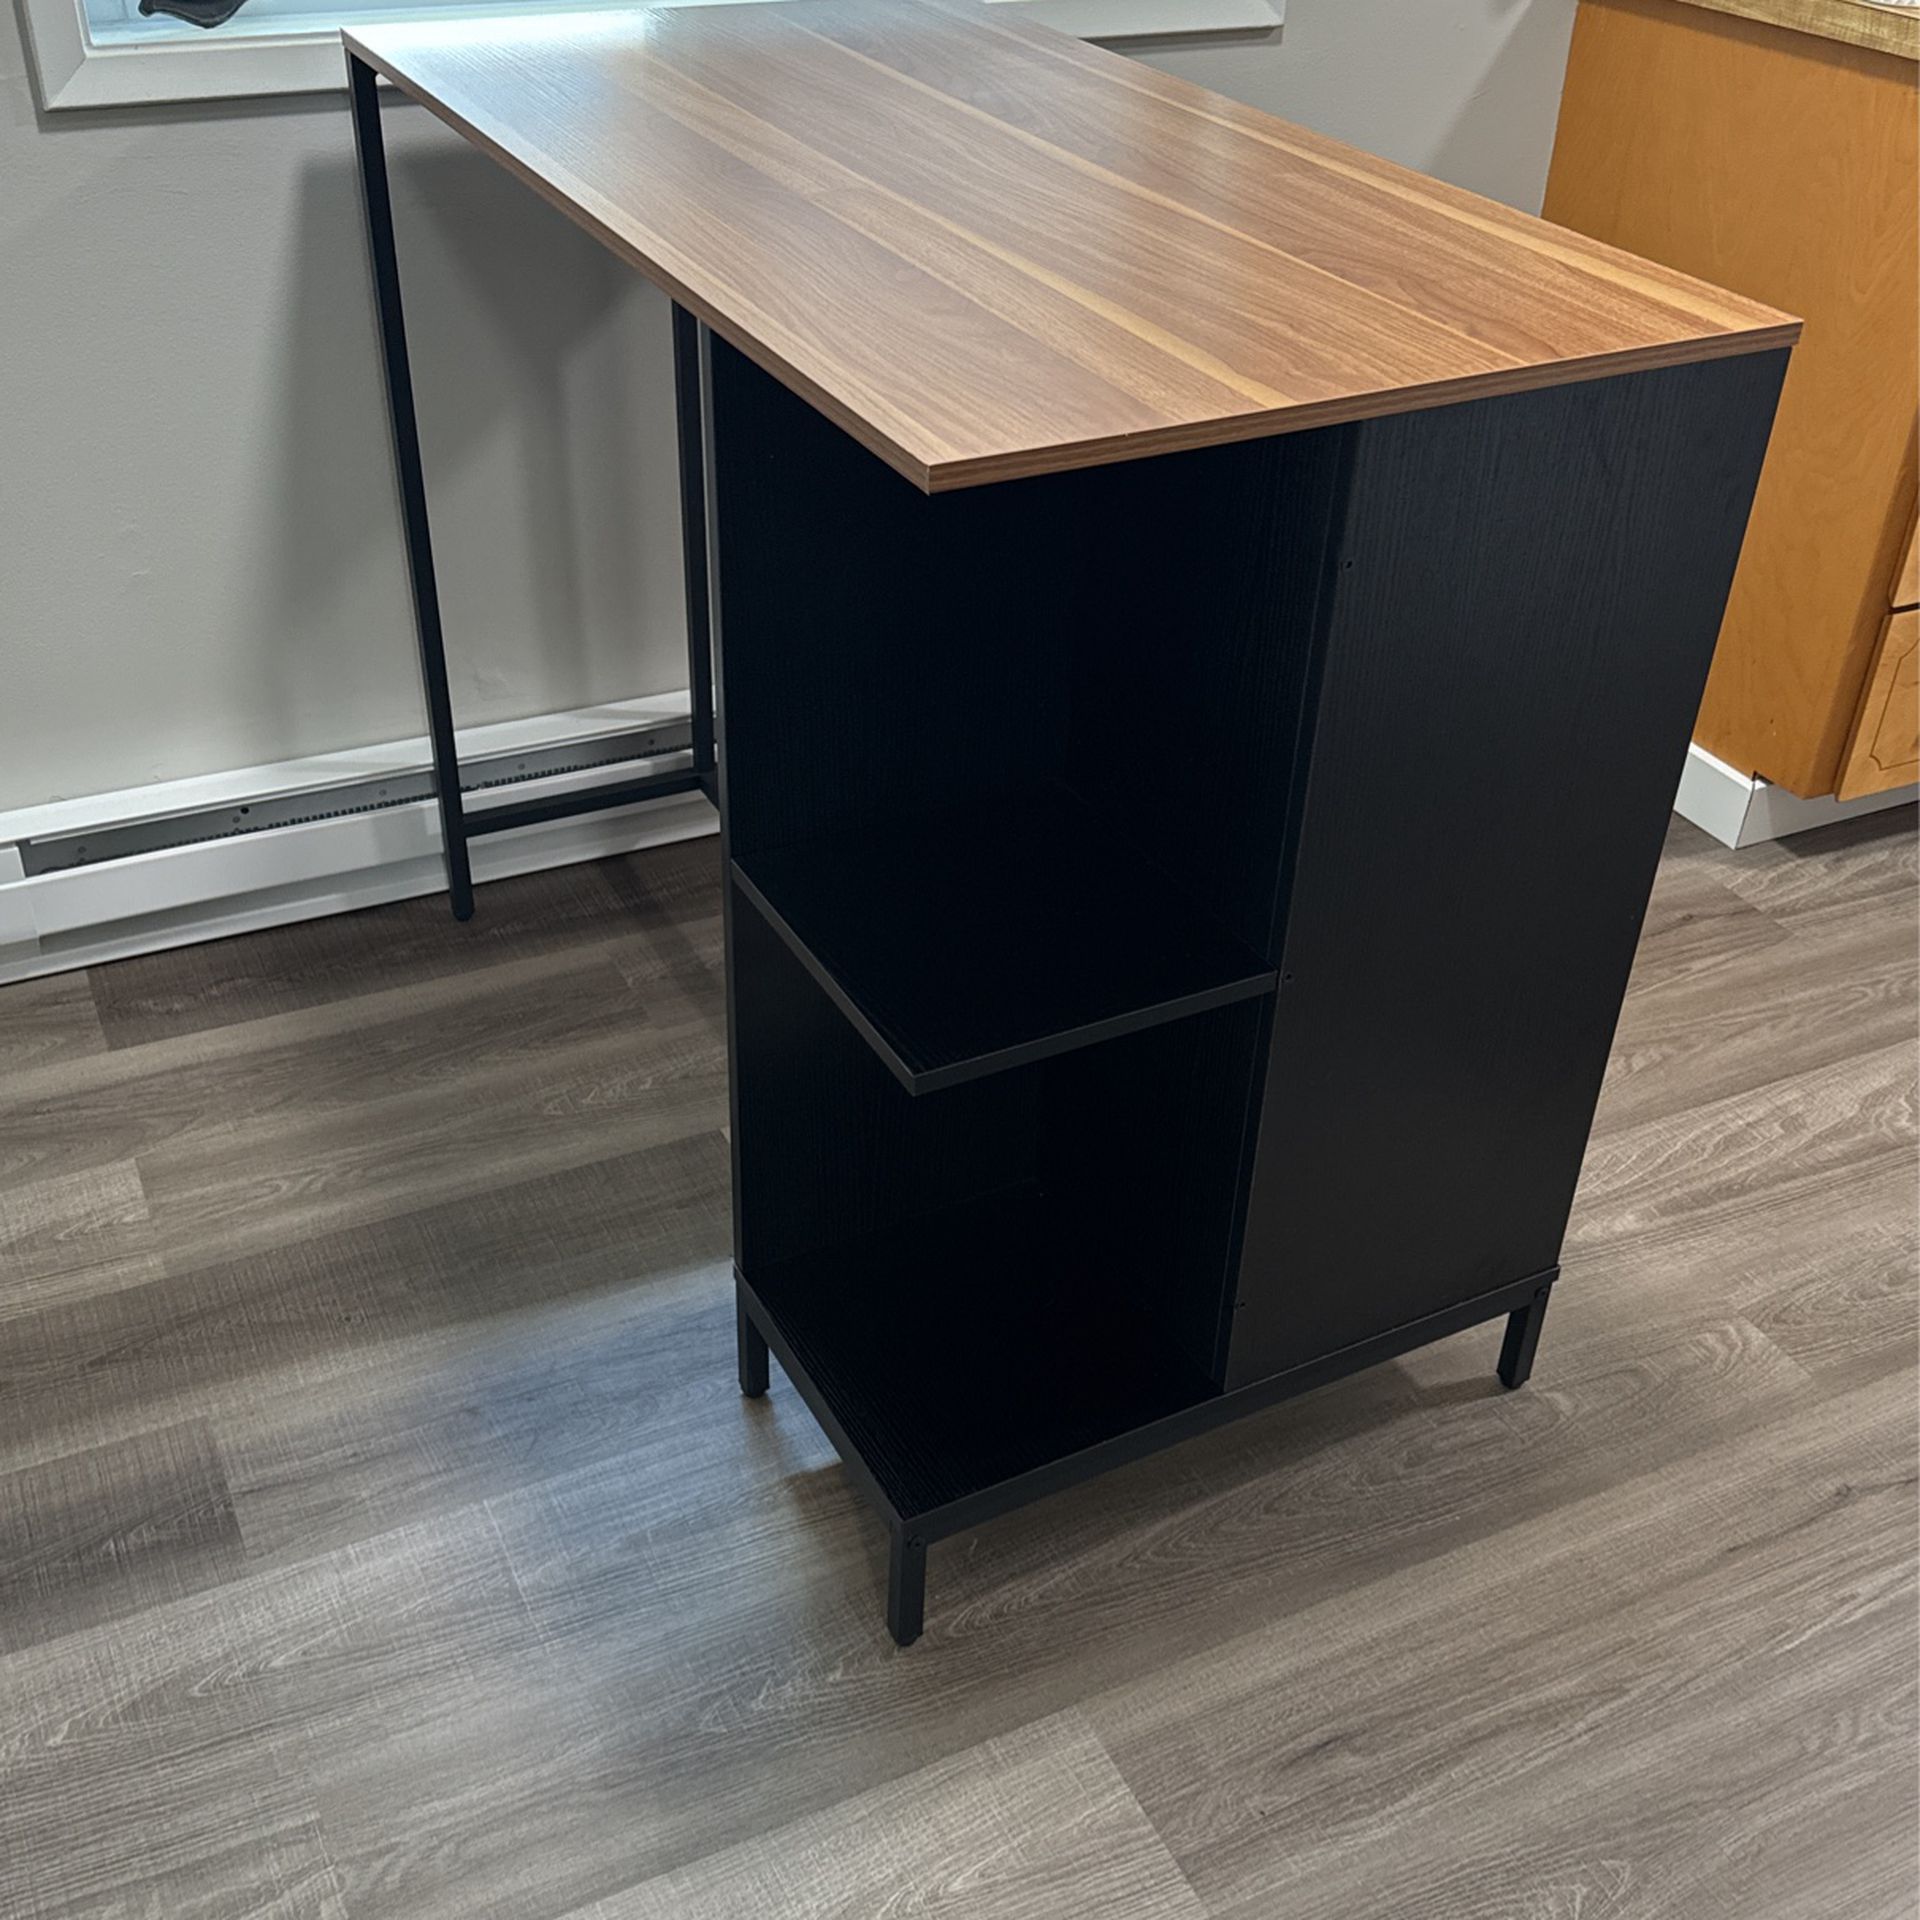 Counter height Kitchen island or dining table with shelves